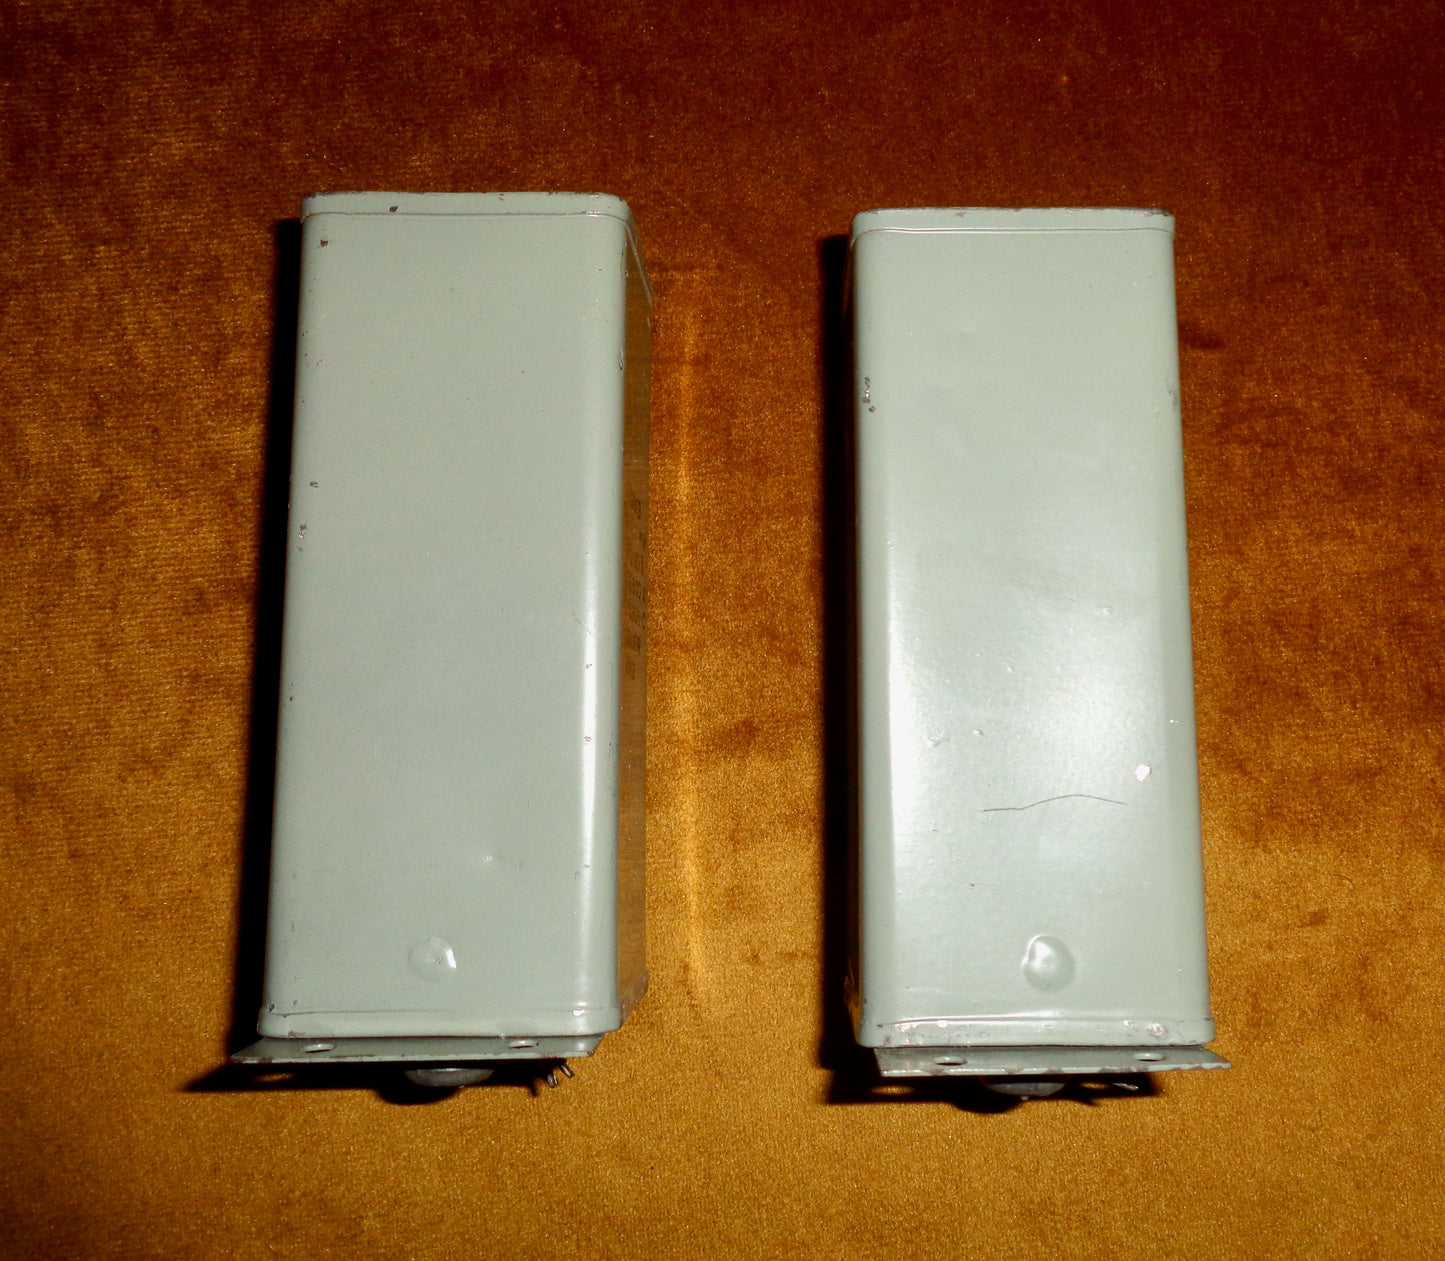 Pair Of Dubilier Paper In Oil Block Capacitors 2uF @ 800V. Brand New old stock